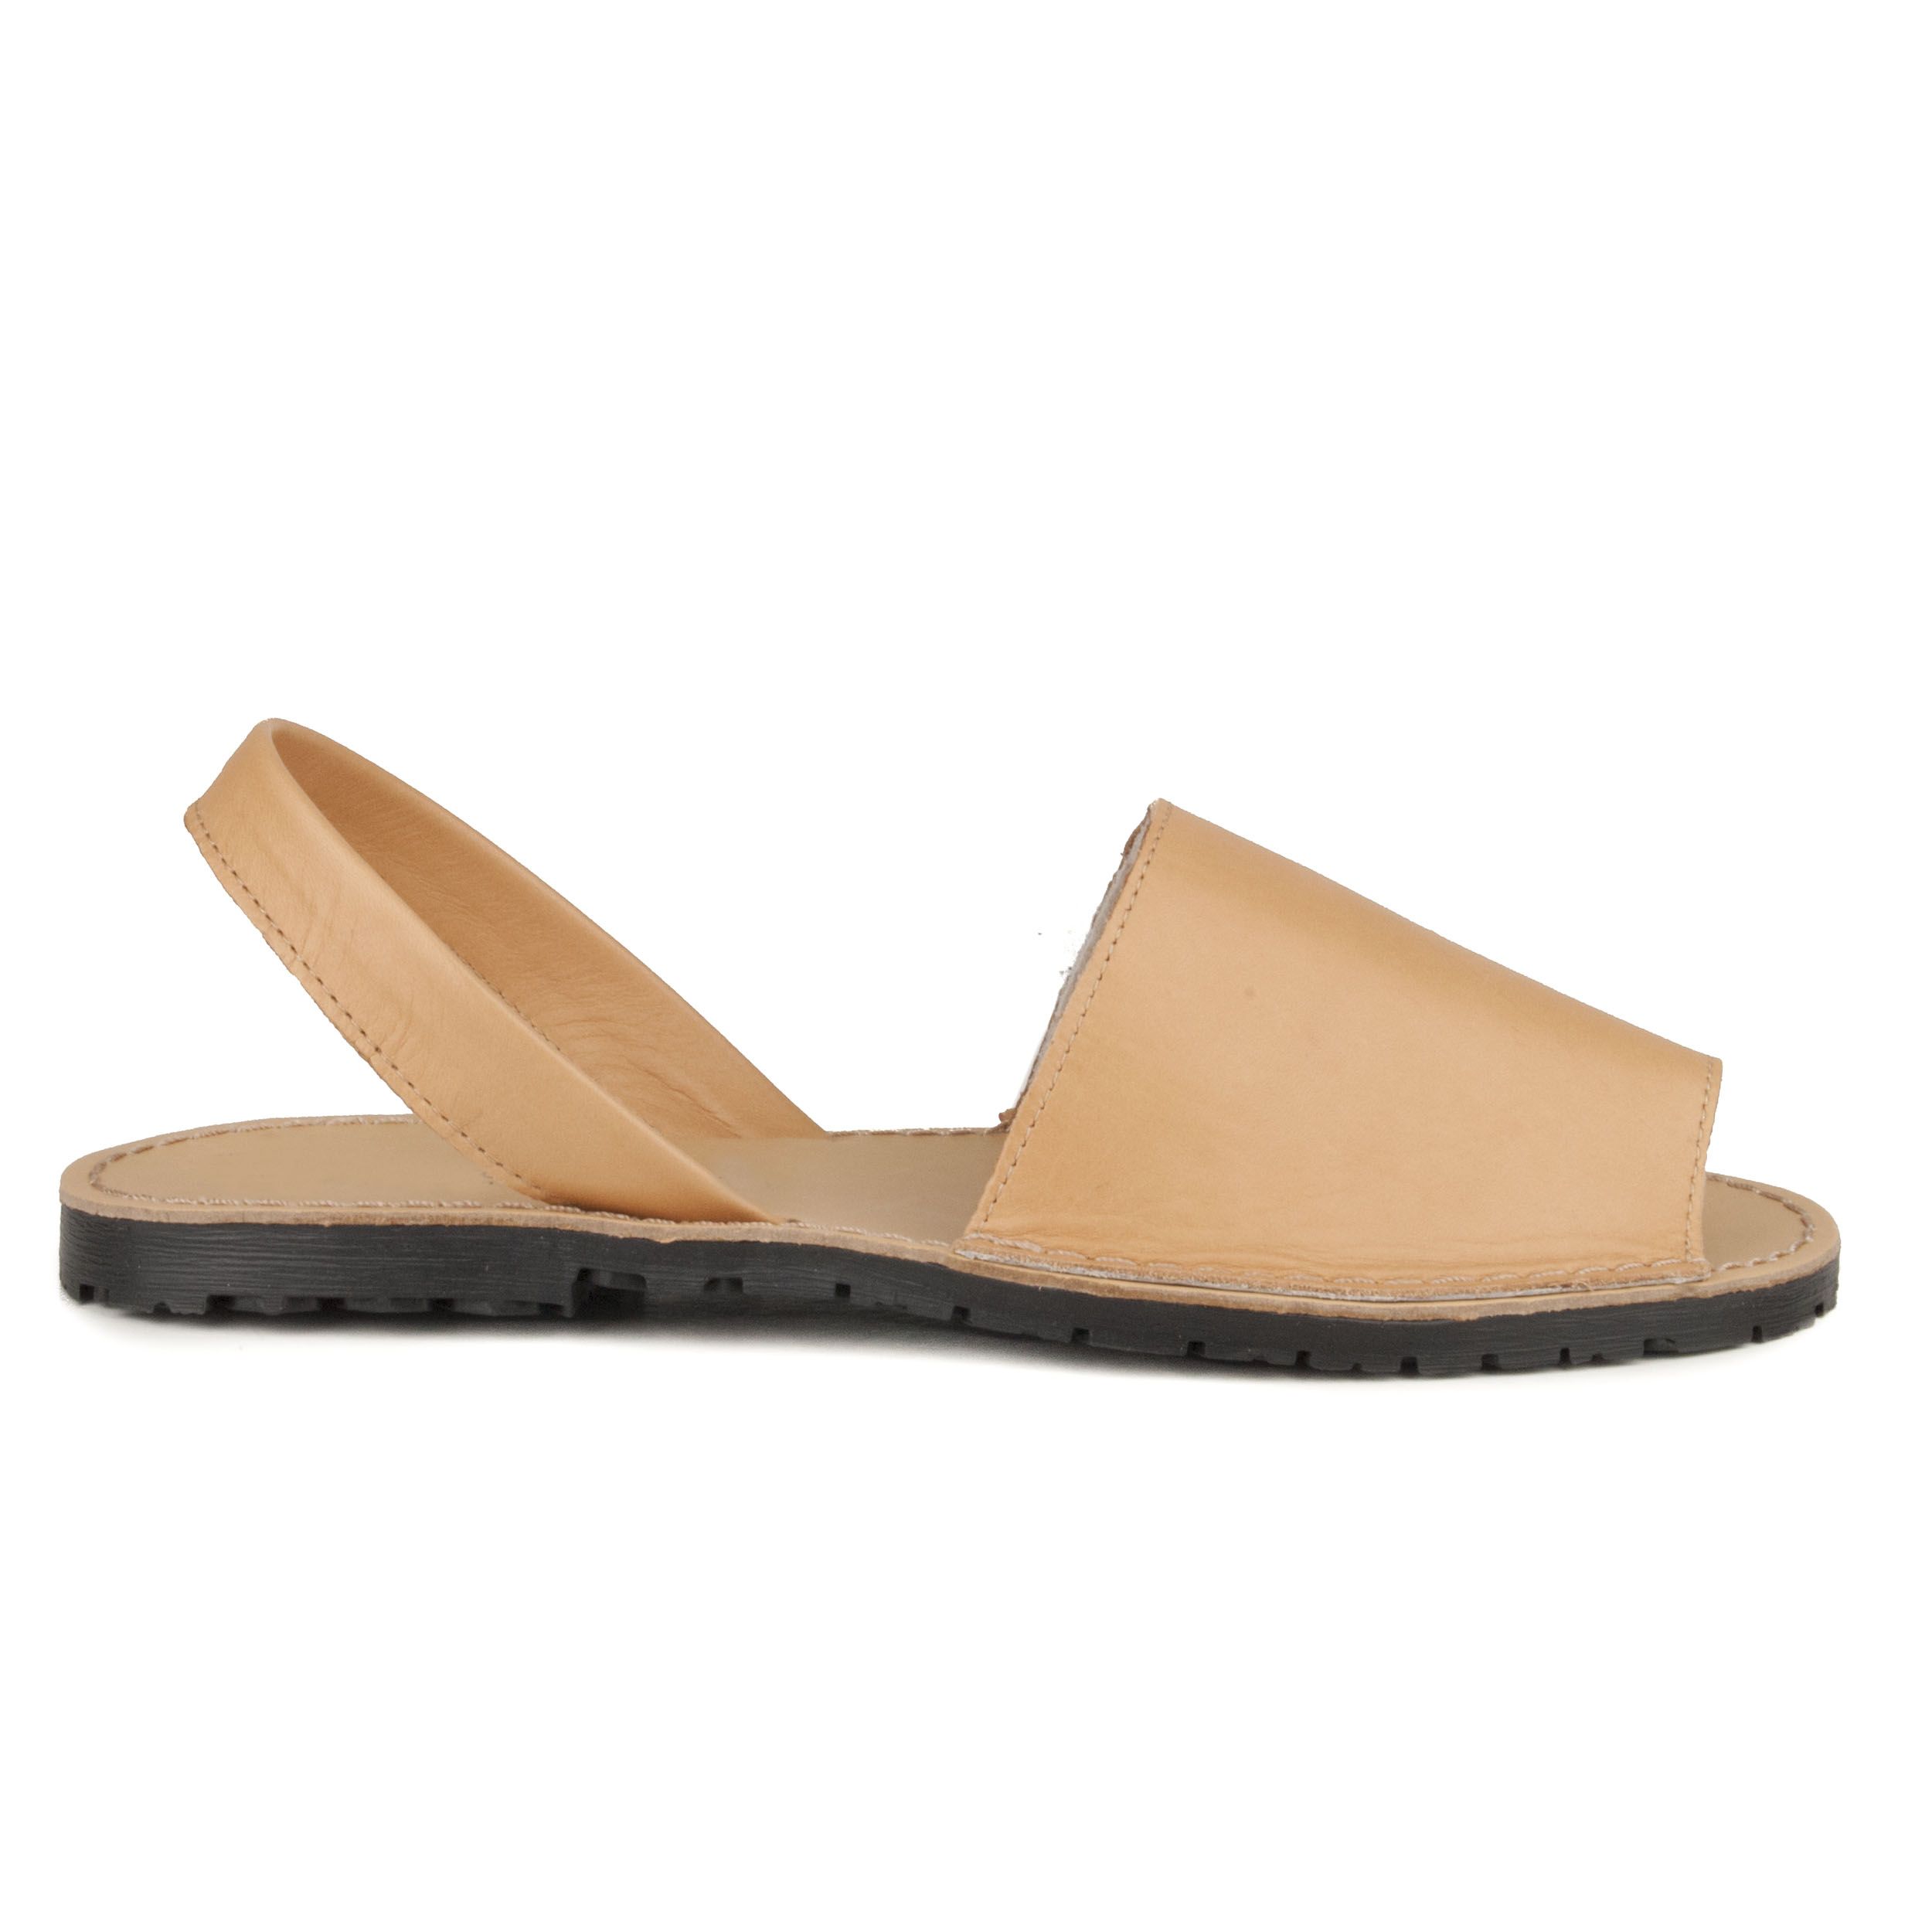 Women's Ibizan sandal, made of natural skin with flexible rubber floor for greatest comfort. Anti-slip sole. Comfortable and very summer. With rear fastening for convenience.